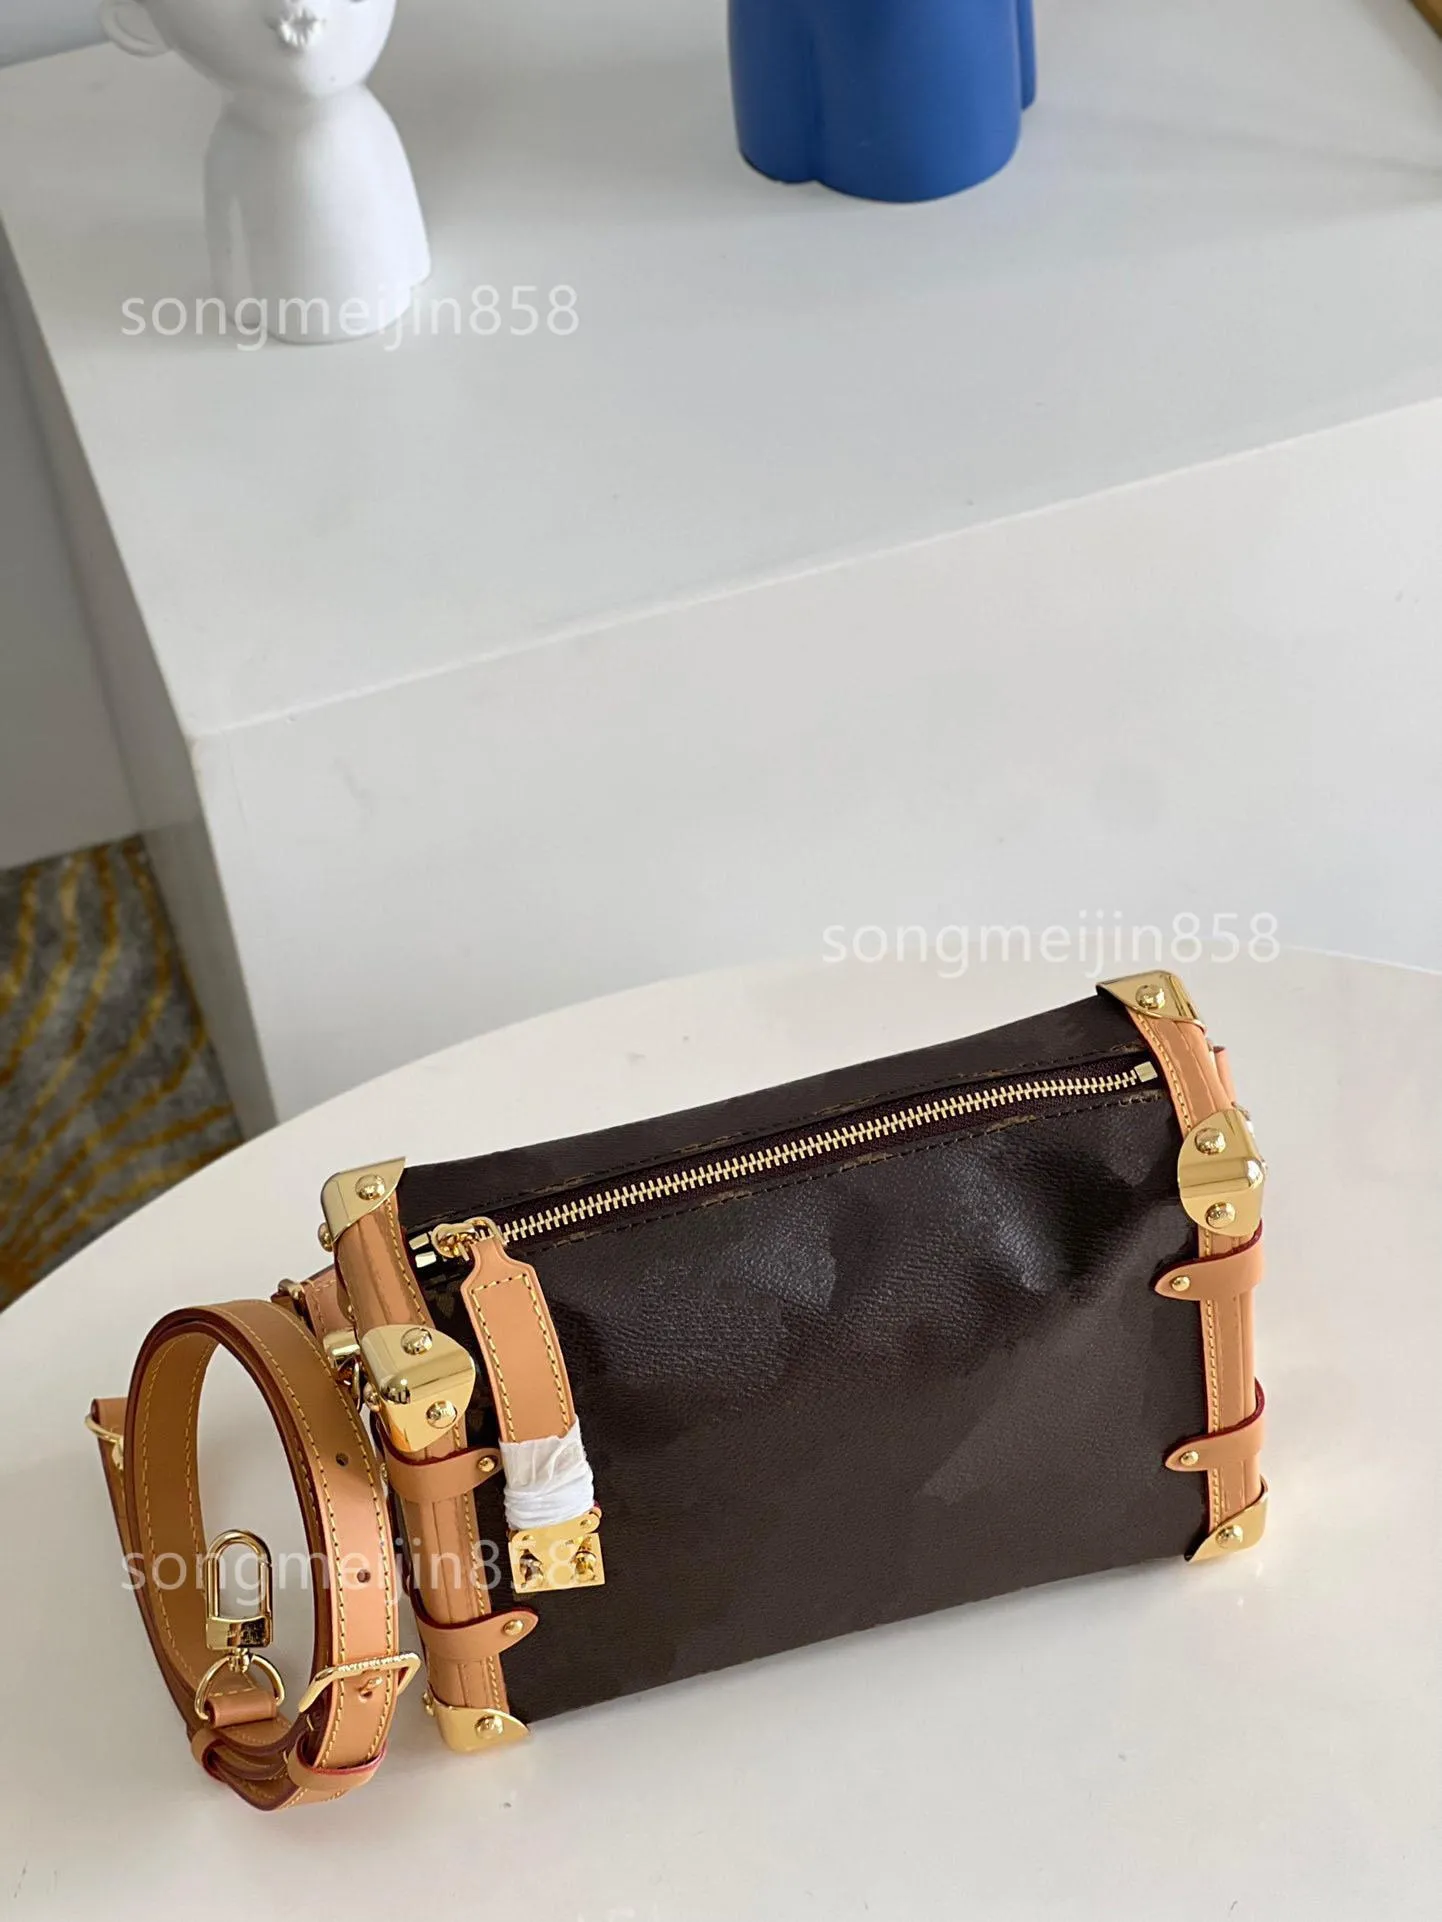 2022 New arrive designer bag side trunk pm old flower box for women M46358 leather crossbody package tote messenger bags298S